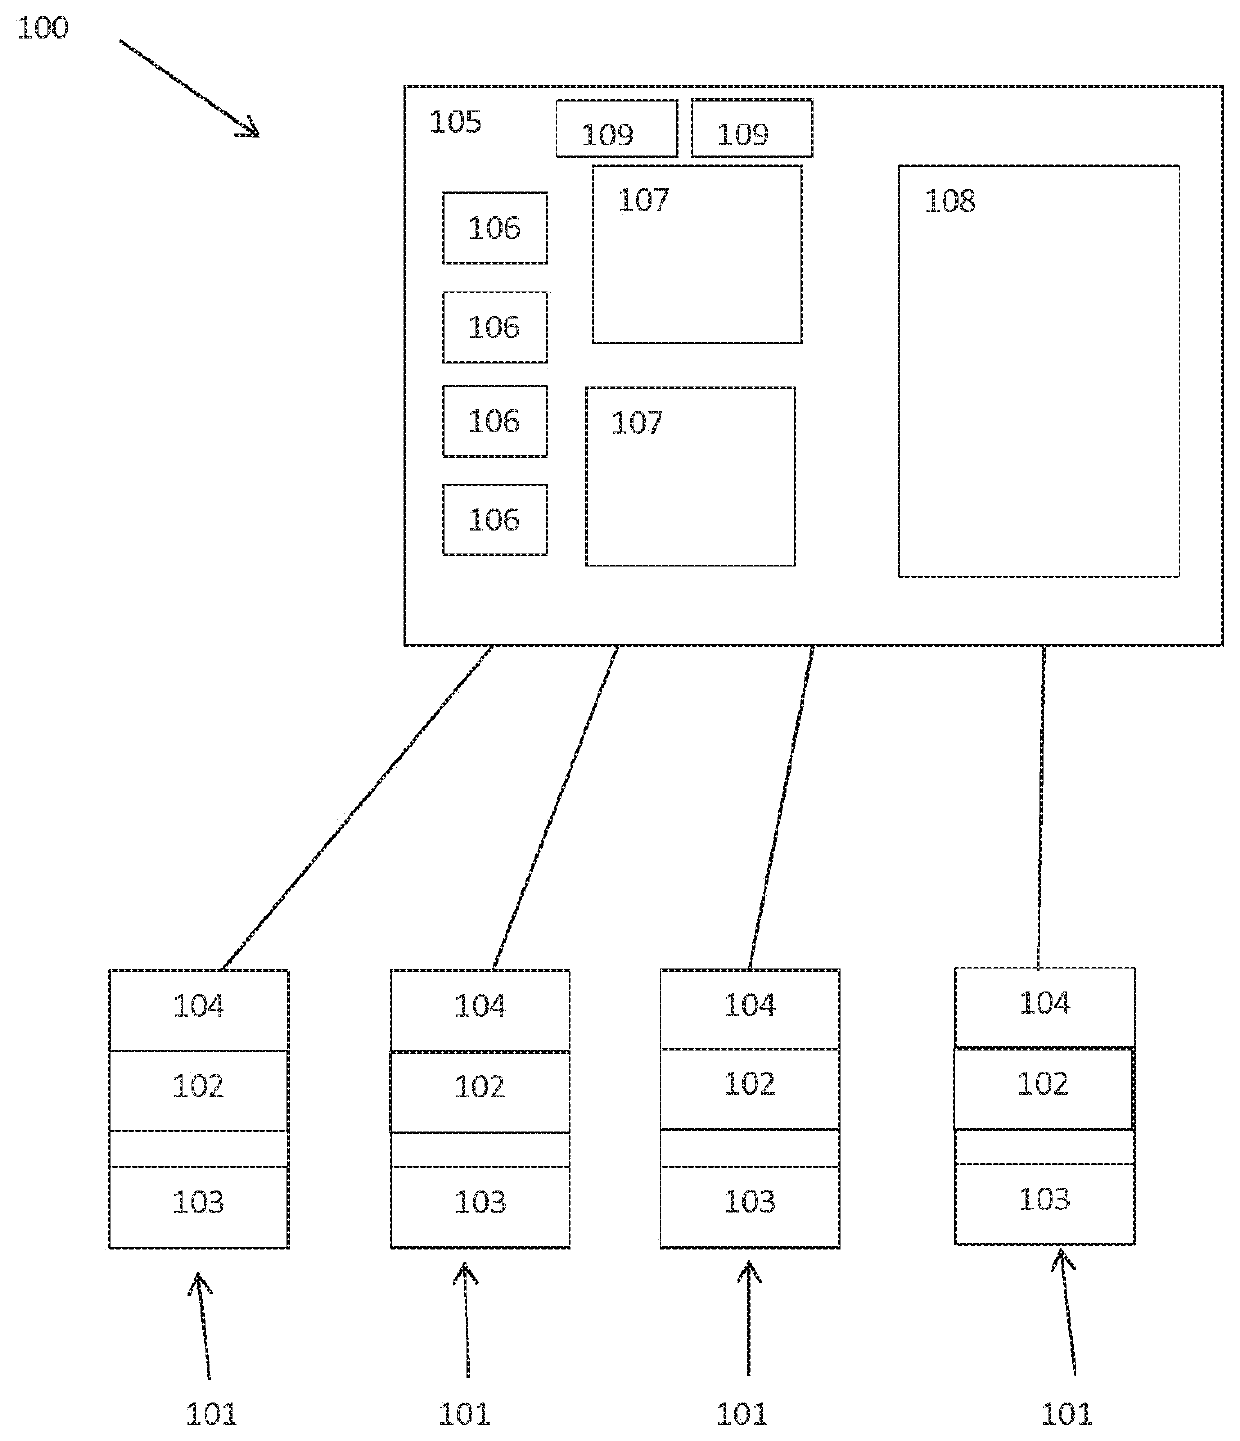 System for analysing genomic data comprising a plurality of application nodes and a knowledge database